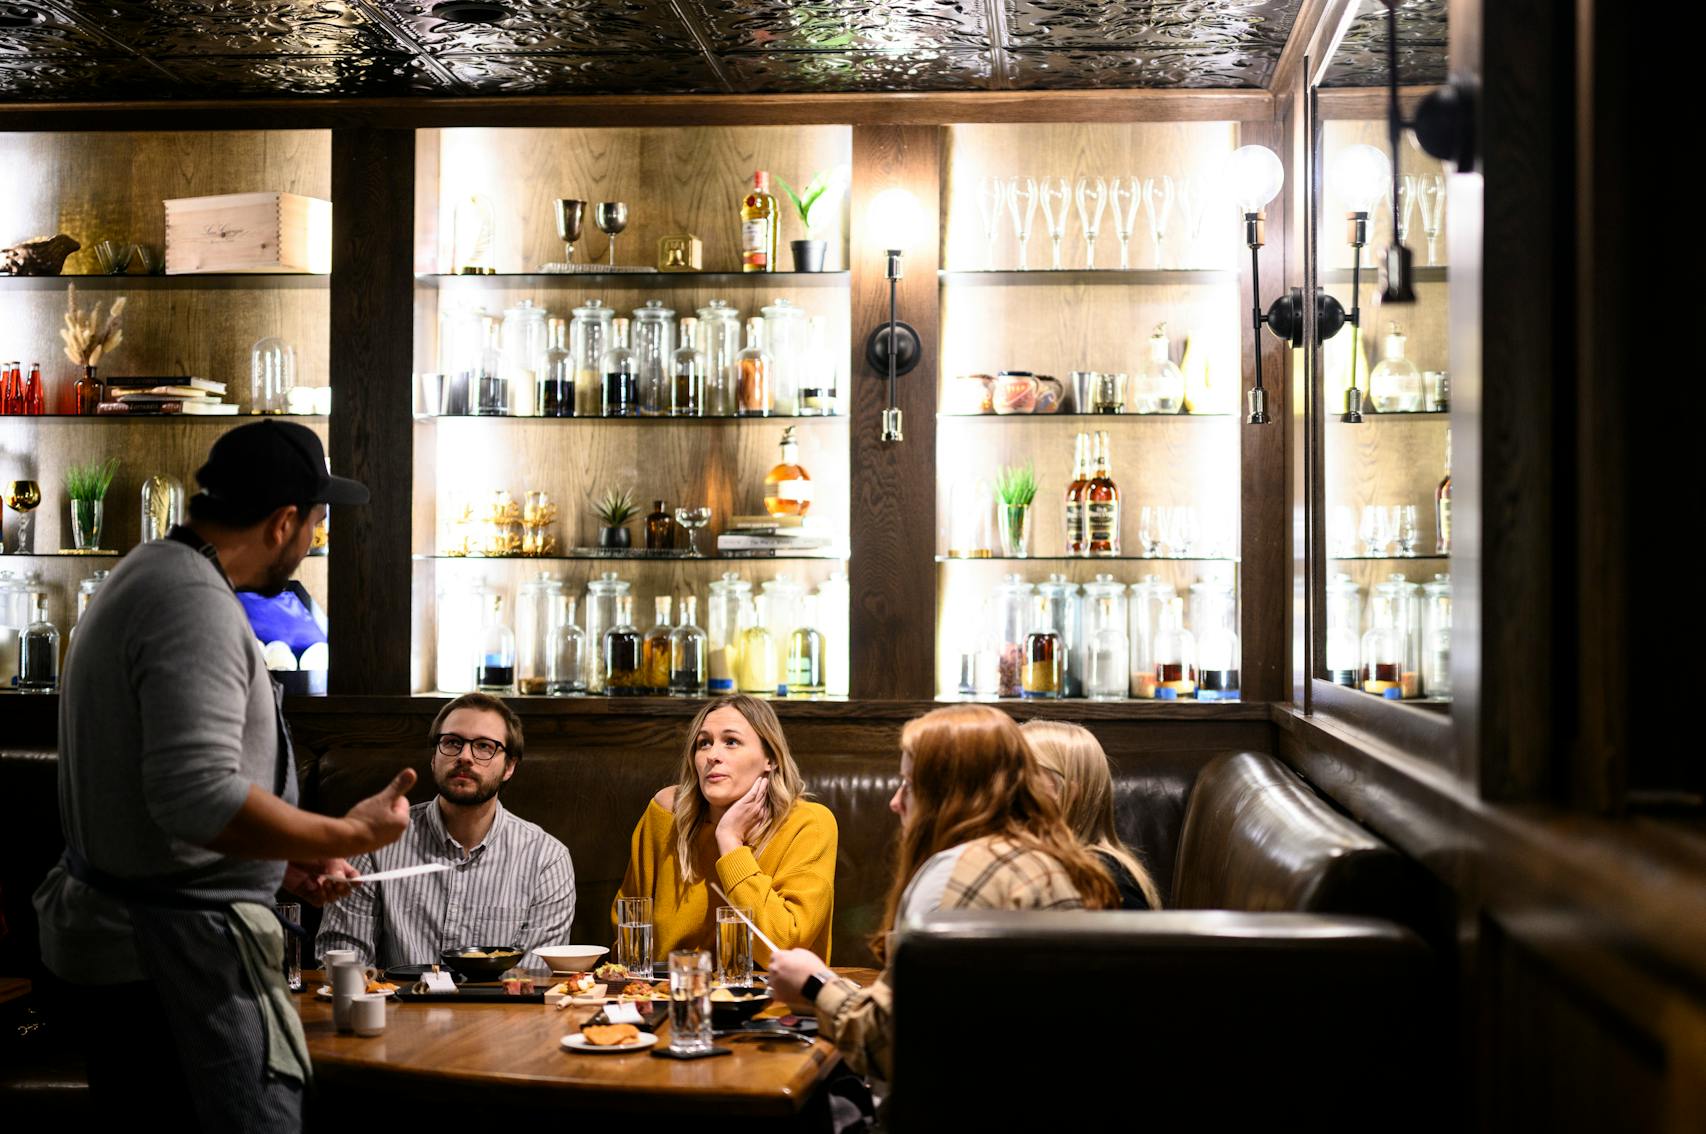 Travail co-owner Bob Gerken, left, speaks with patrons, from left, Jack Sturtz, Morgan Stadheim, Britta Rinke and Julia Sieling as they enjoy their first bites in the Basement Bar Wednesday, Feb. 16, 2022 at Travail Kitchen and Amusements in Robbinsdale, Minn. ] AARON LAVINSKY • aaron.lavinsky@startribune.com